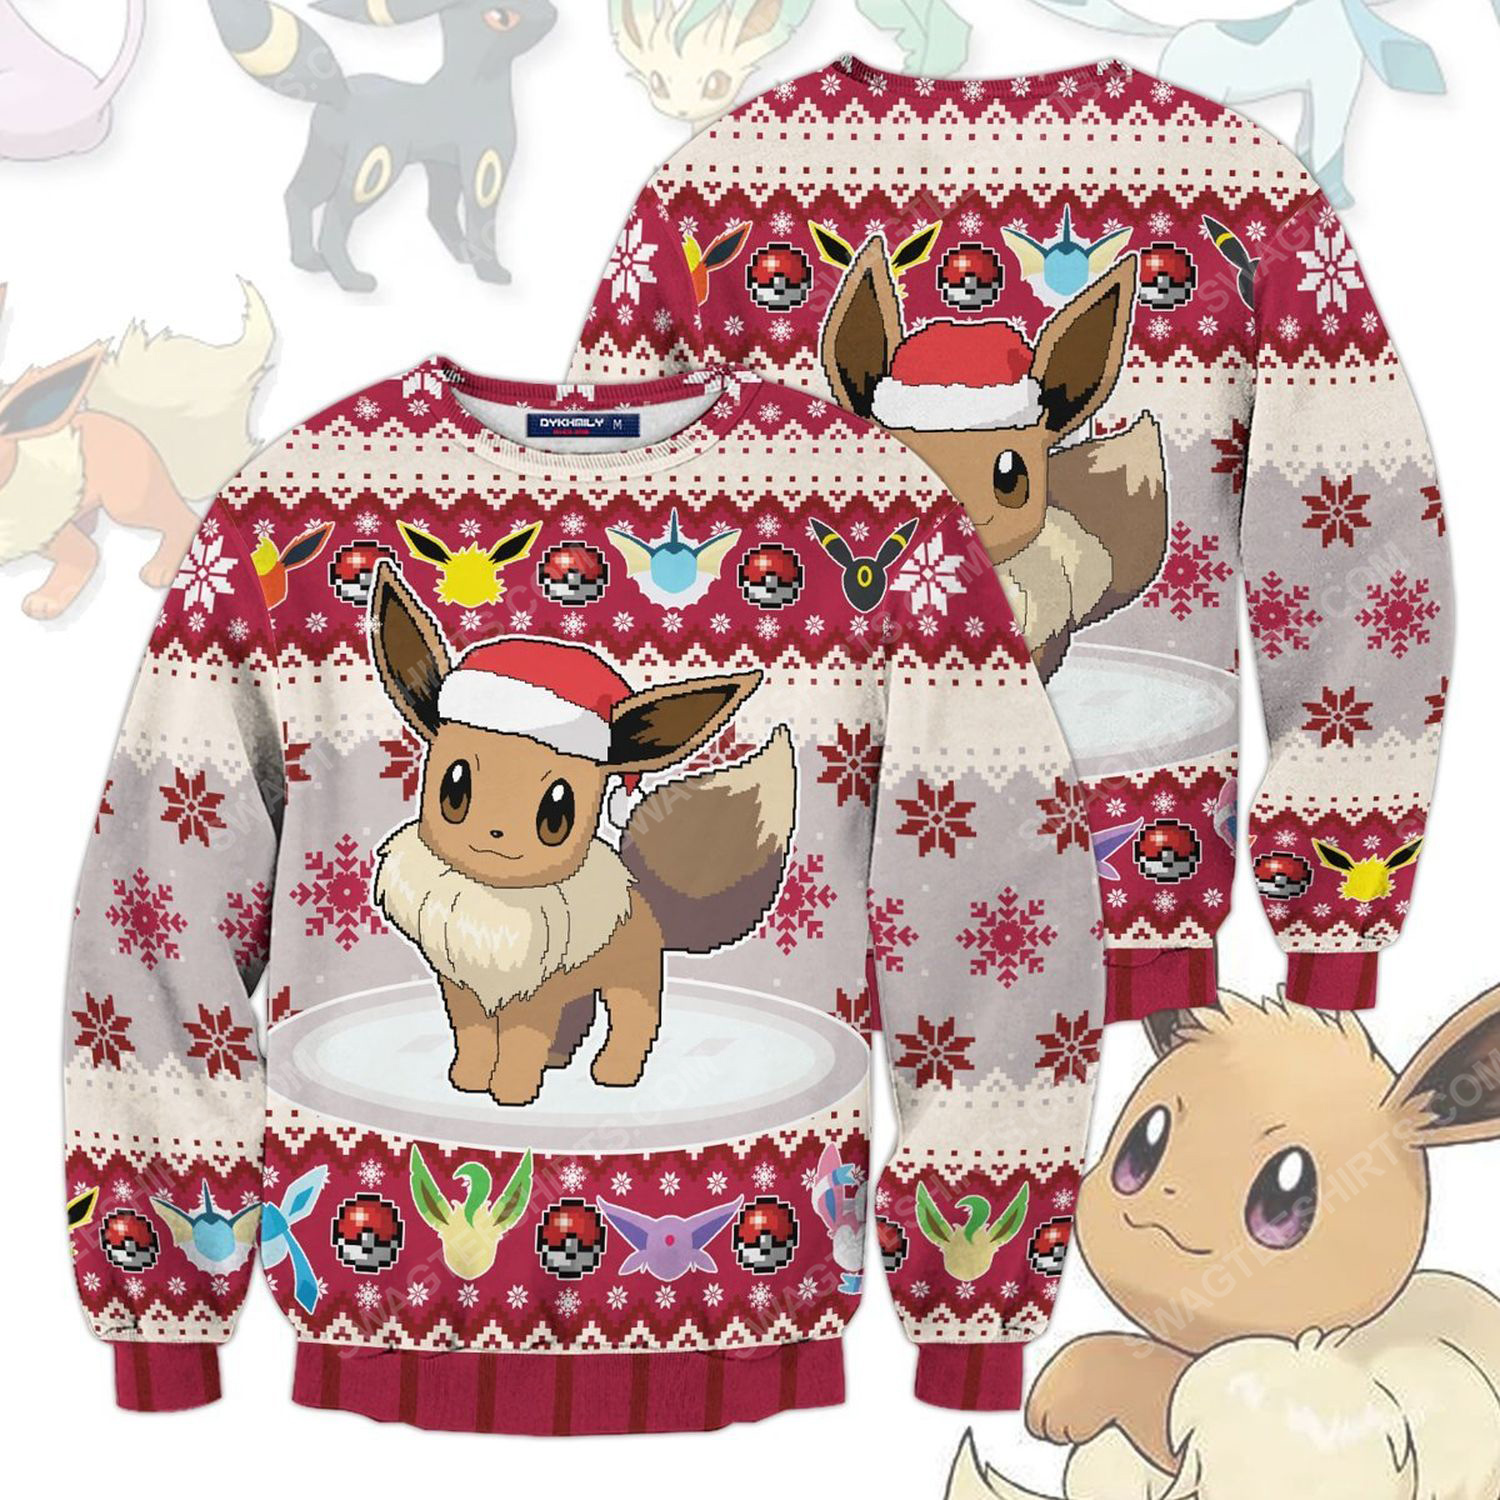 [special edition] Pokemon eeveelution christmas holiday ugly christmas sweater – maria